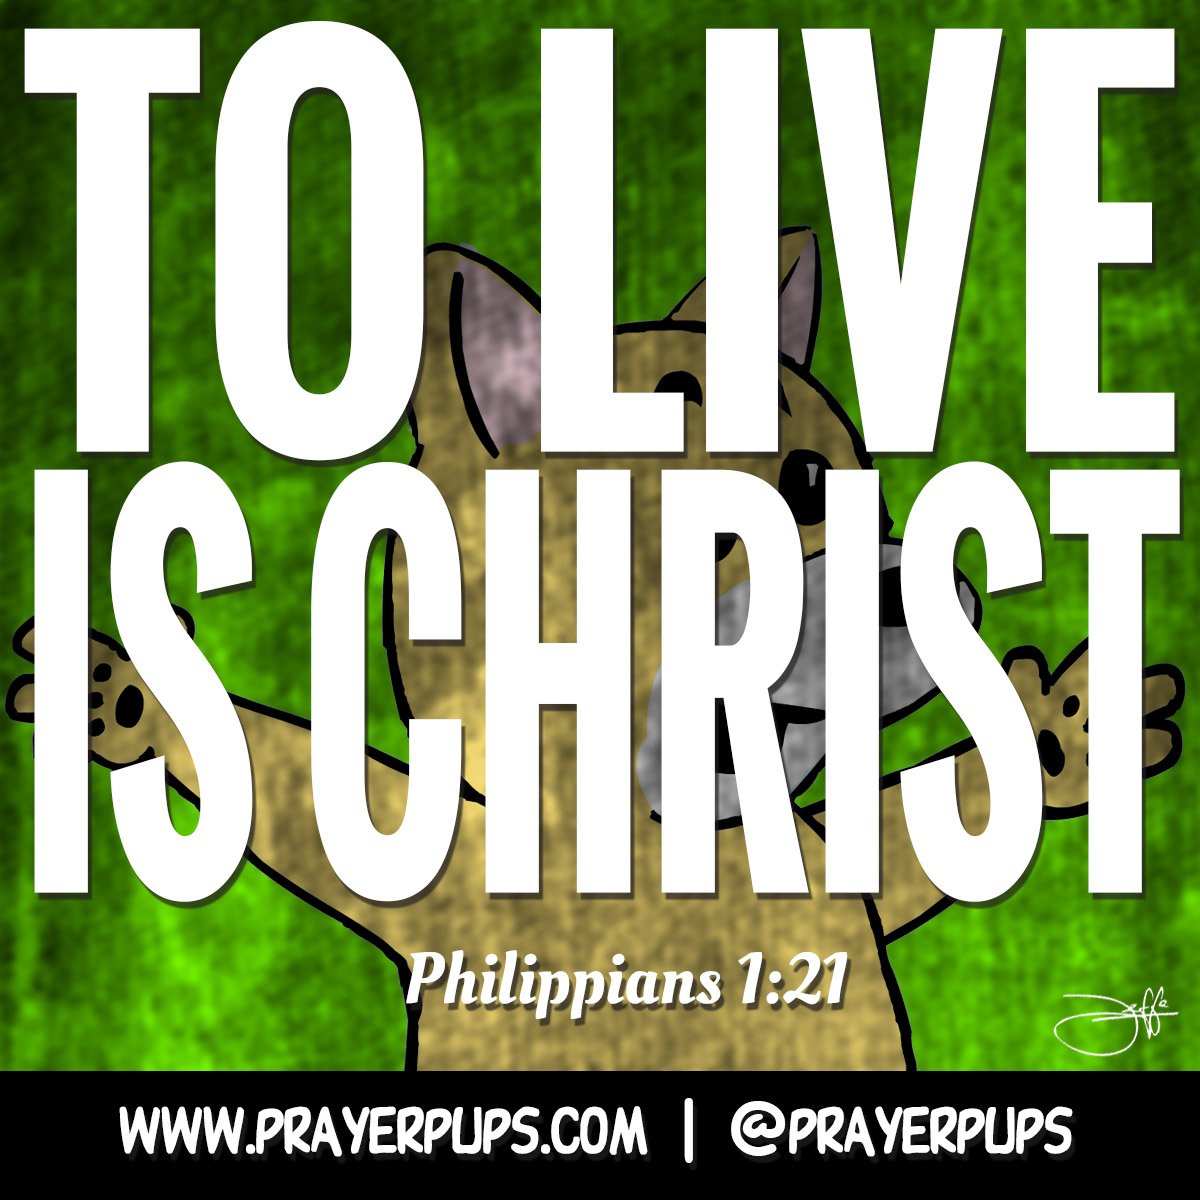 To Live Is Christ